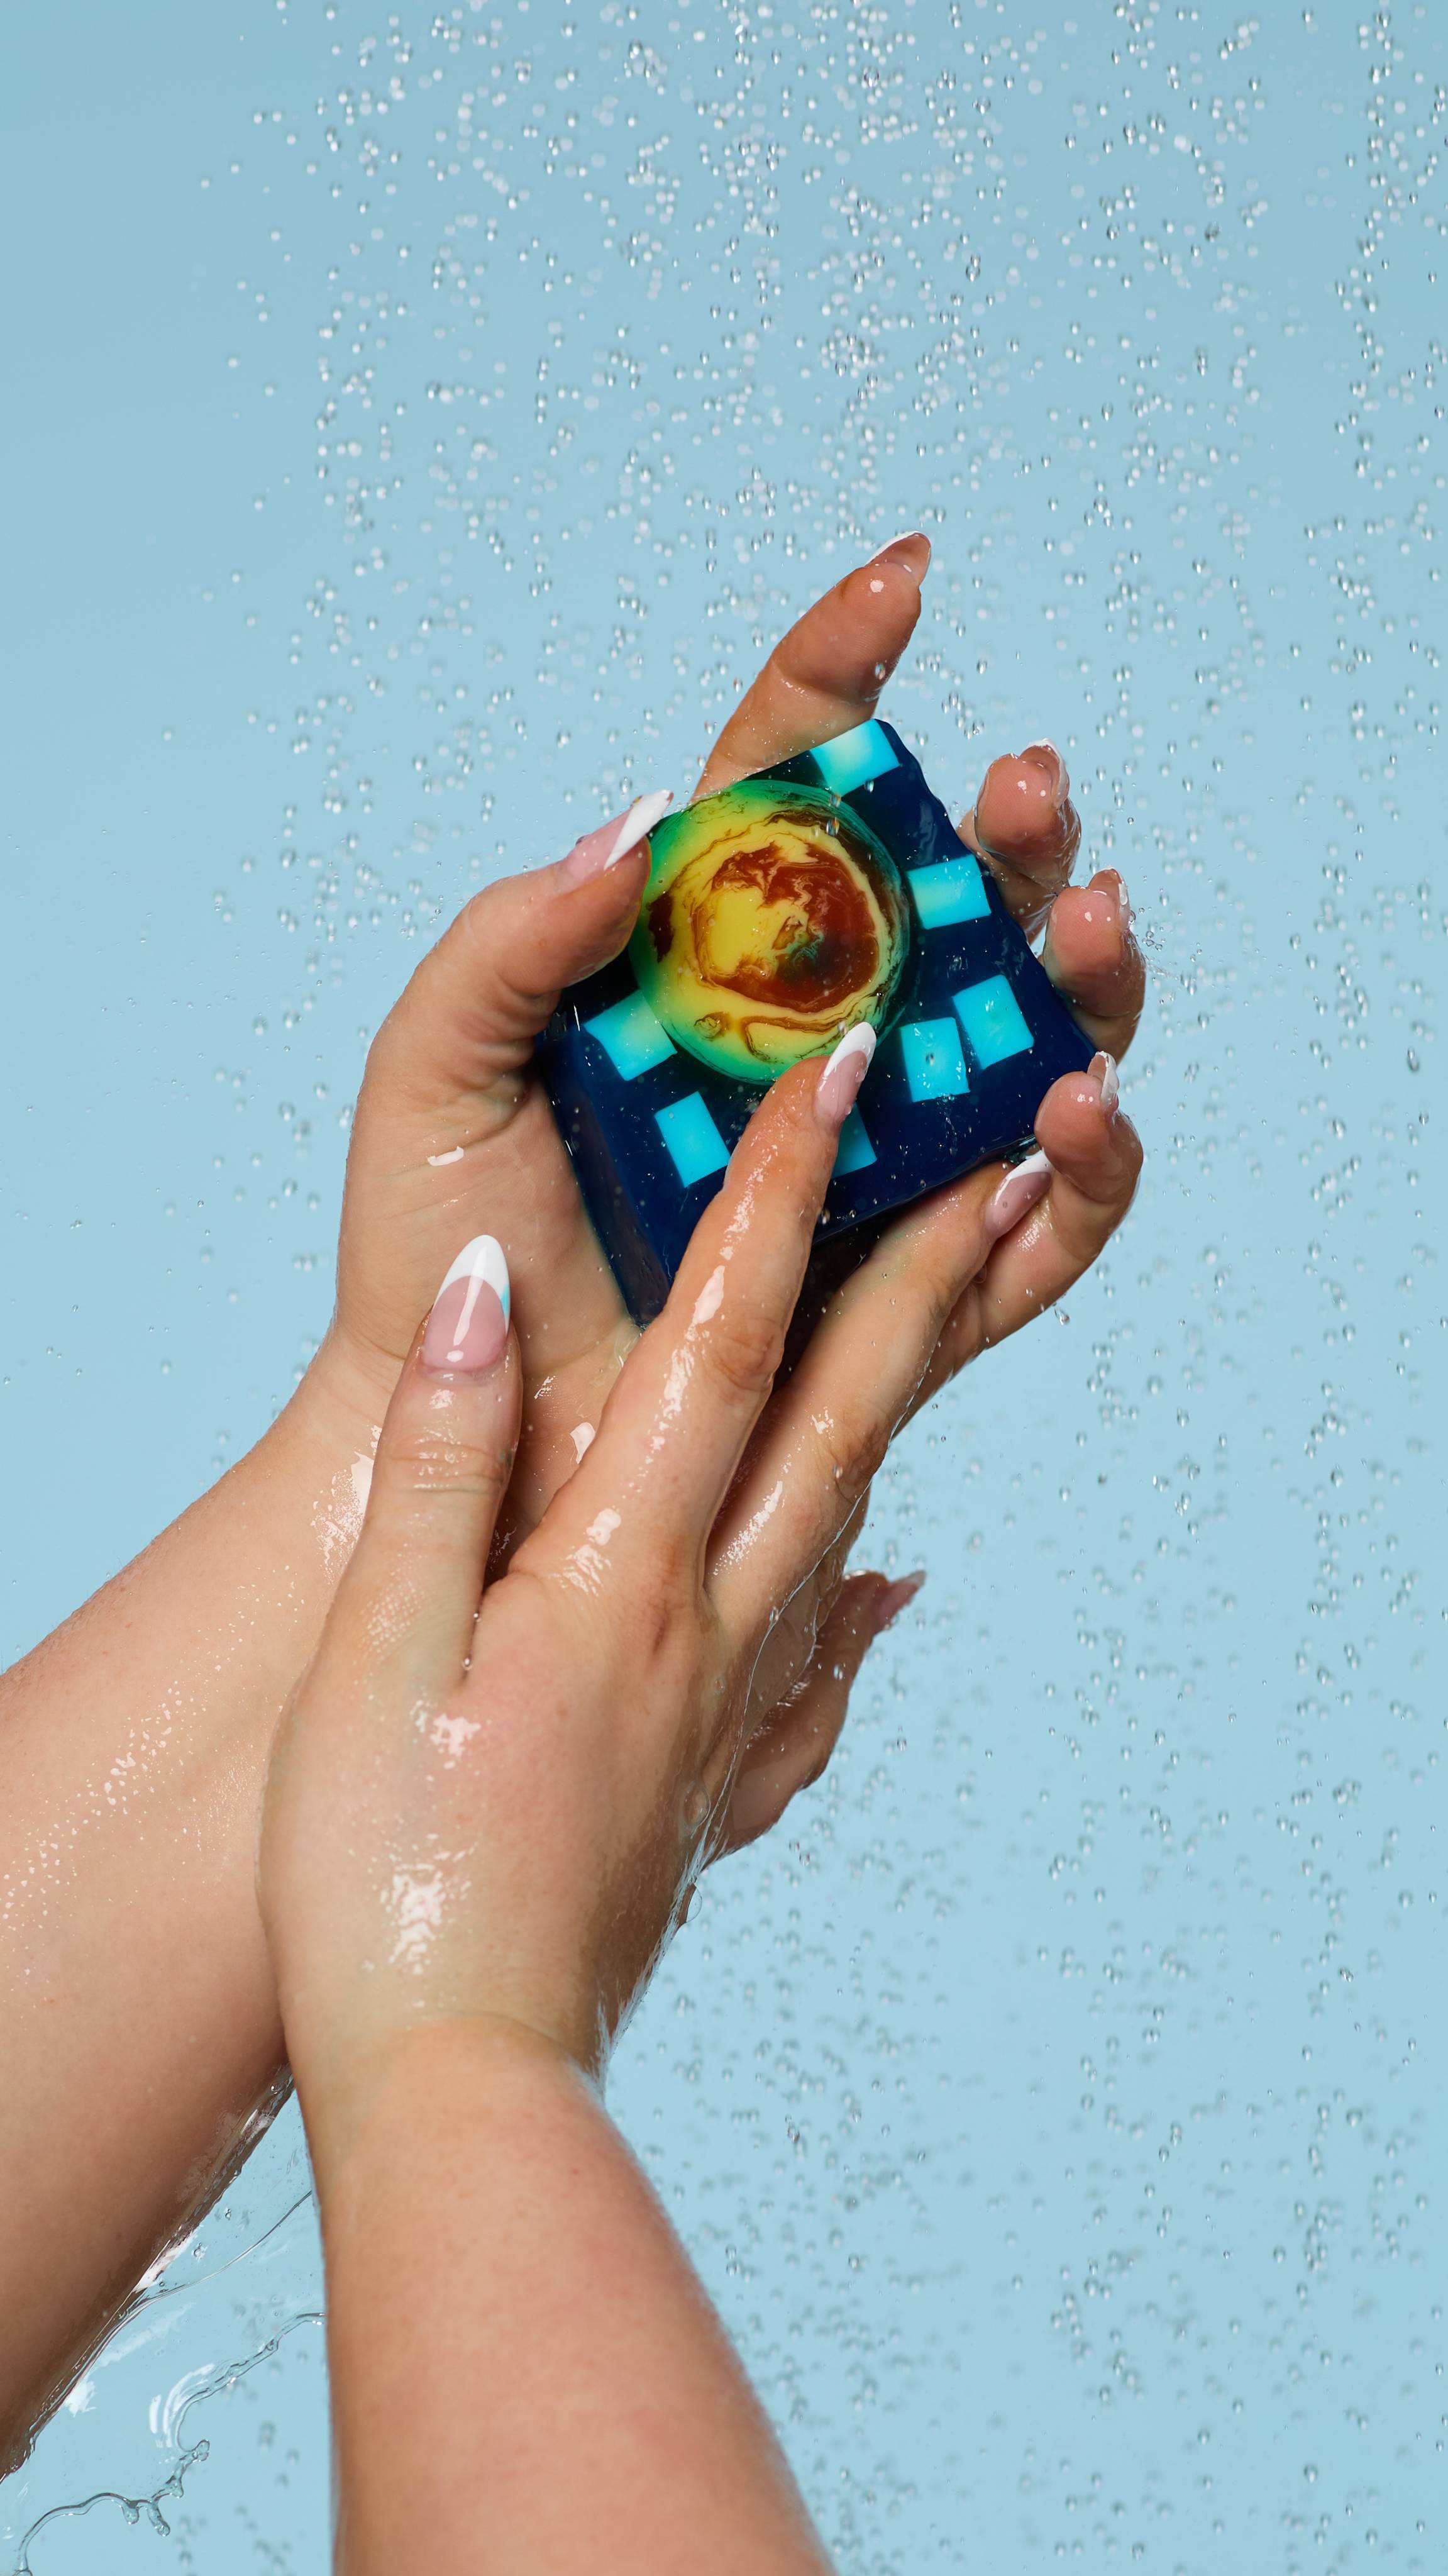 A close-up of the model's hands, lathered up with soapy suds while holding the Alban Arthan soap. Water is falling from above and there is a pale blue background.